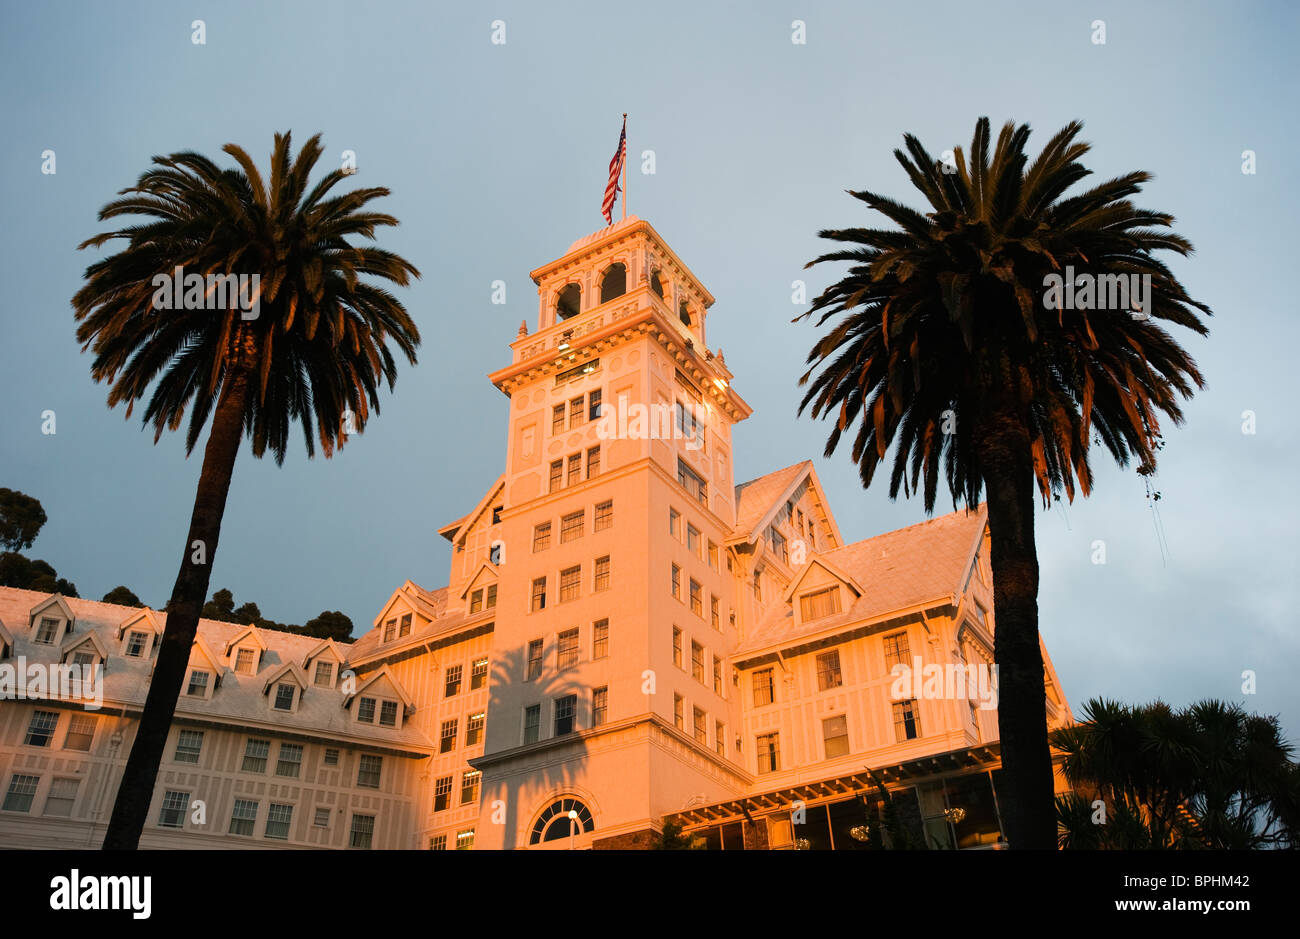 Claremont Hotel and Resort, Historic Hotel at dusk with Palm Trees, Berkeley California USA Stock Photo